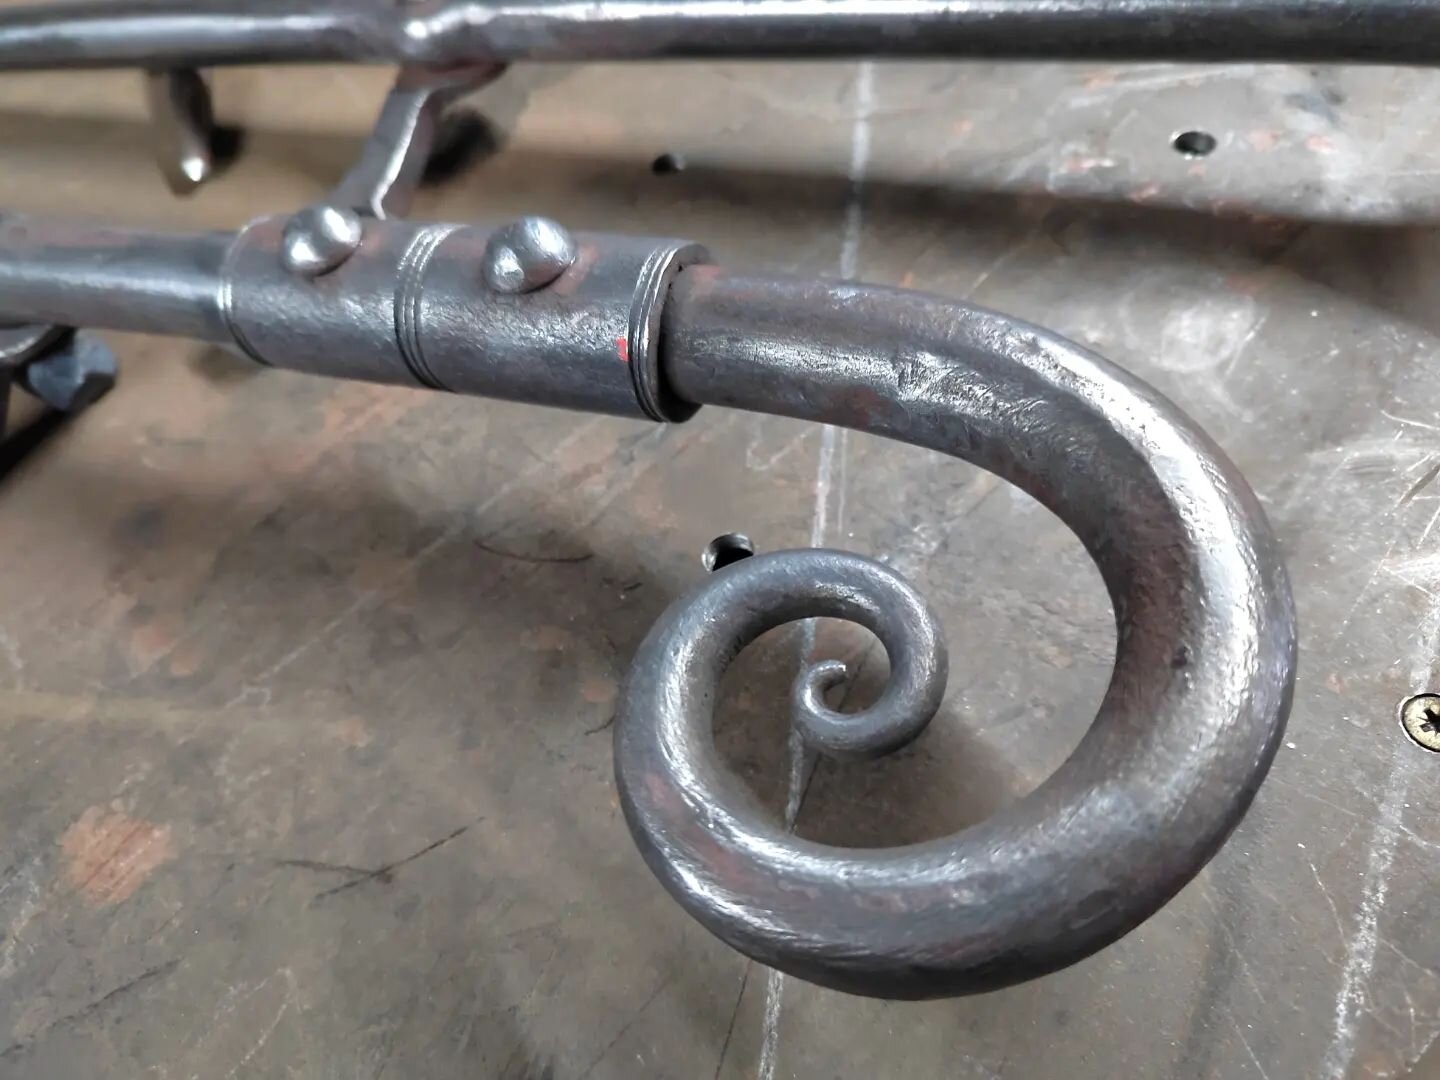 Just a few bits from this week - the decorative parts of some handrails I've been making for a customerand a little digging adze for another customer
#rwhalbertblacksmith #middlerowforge #traditionalblacksmith #handmade #handforged #bespokehandrail #